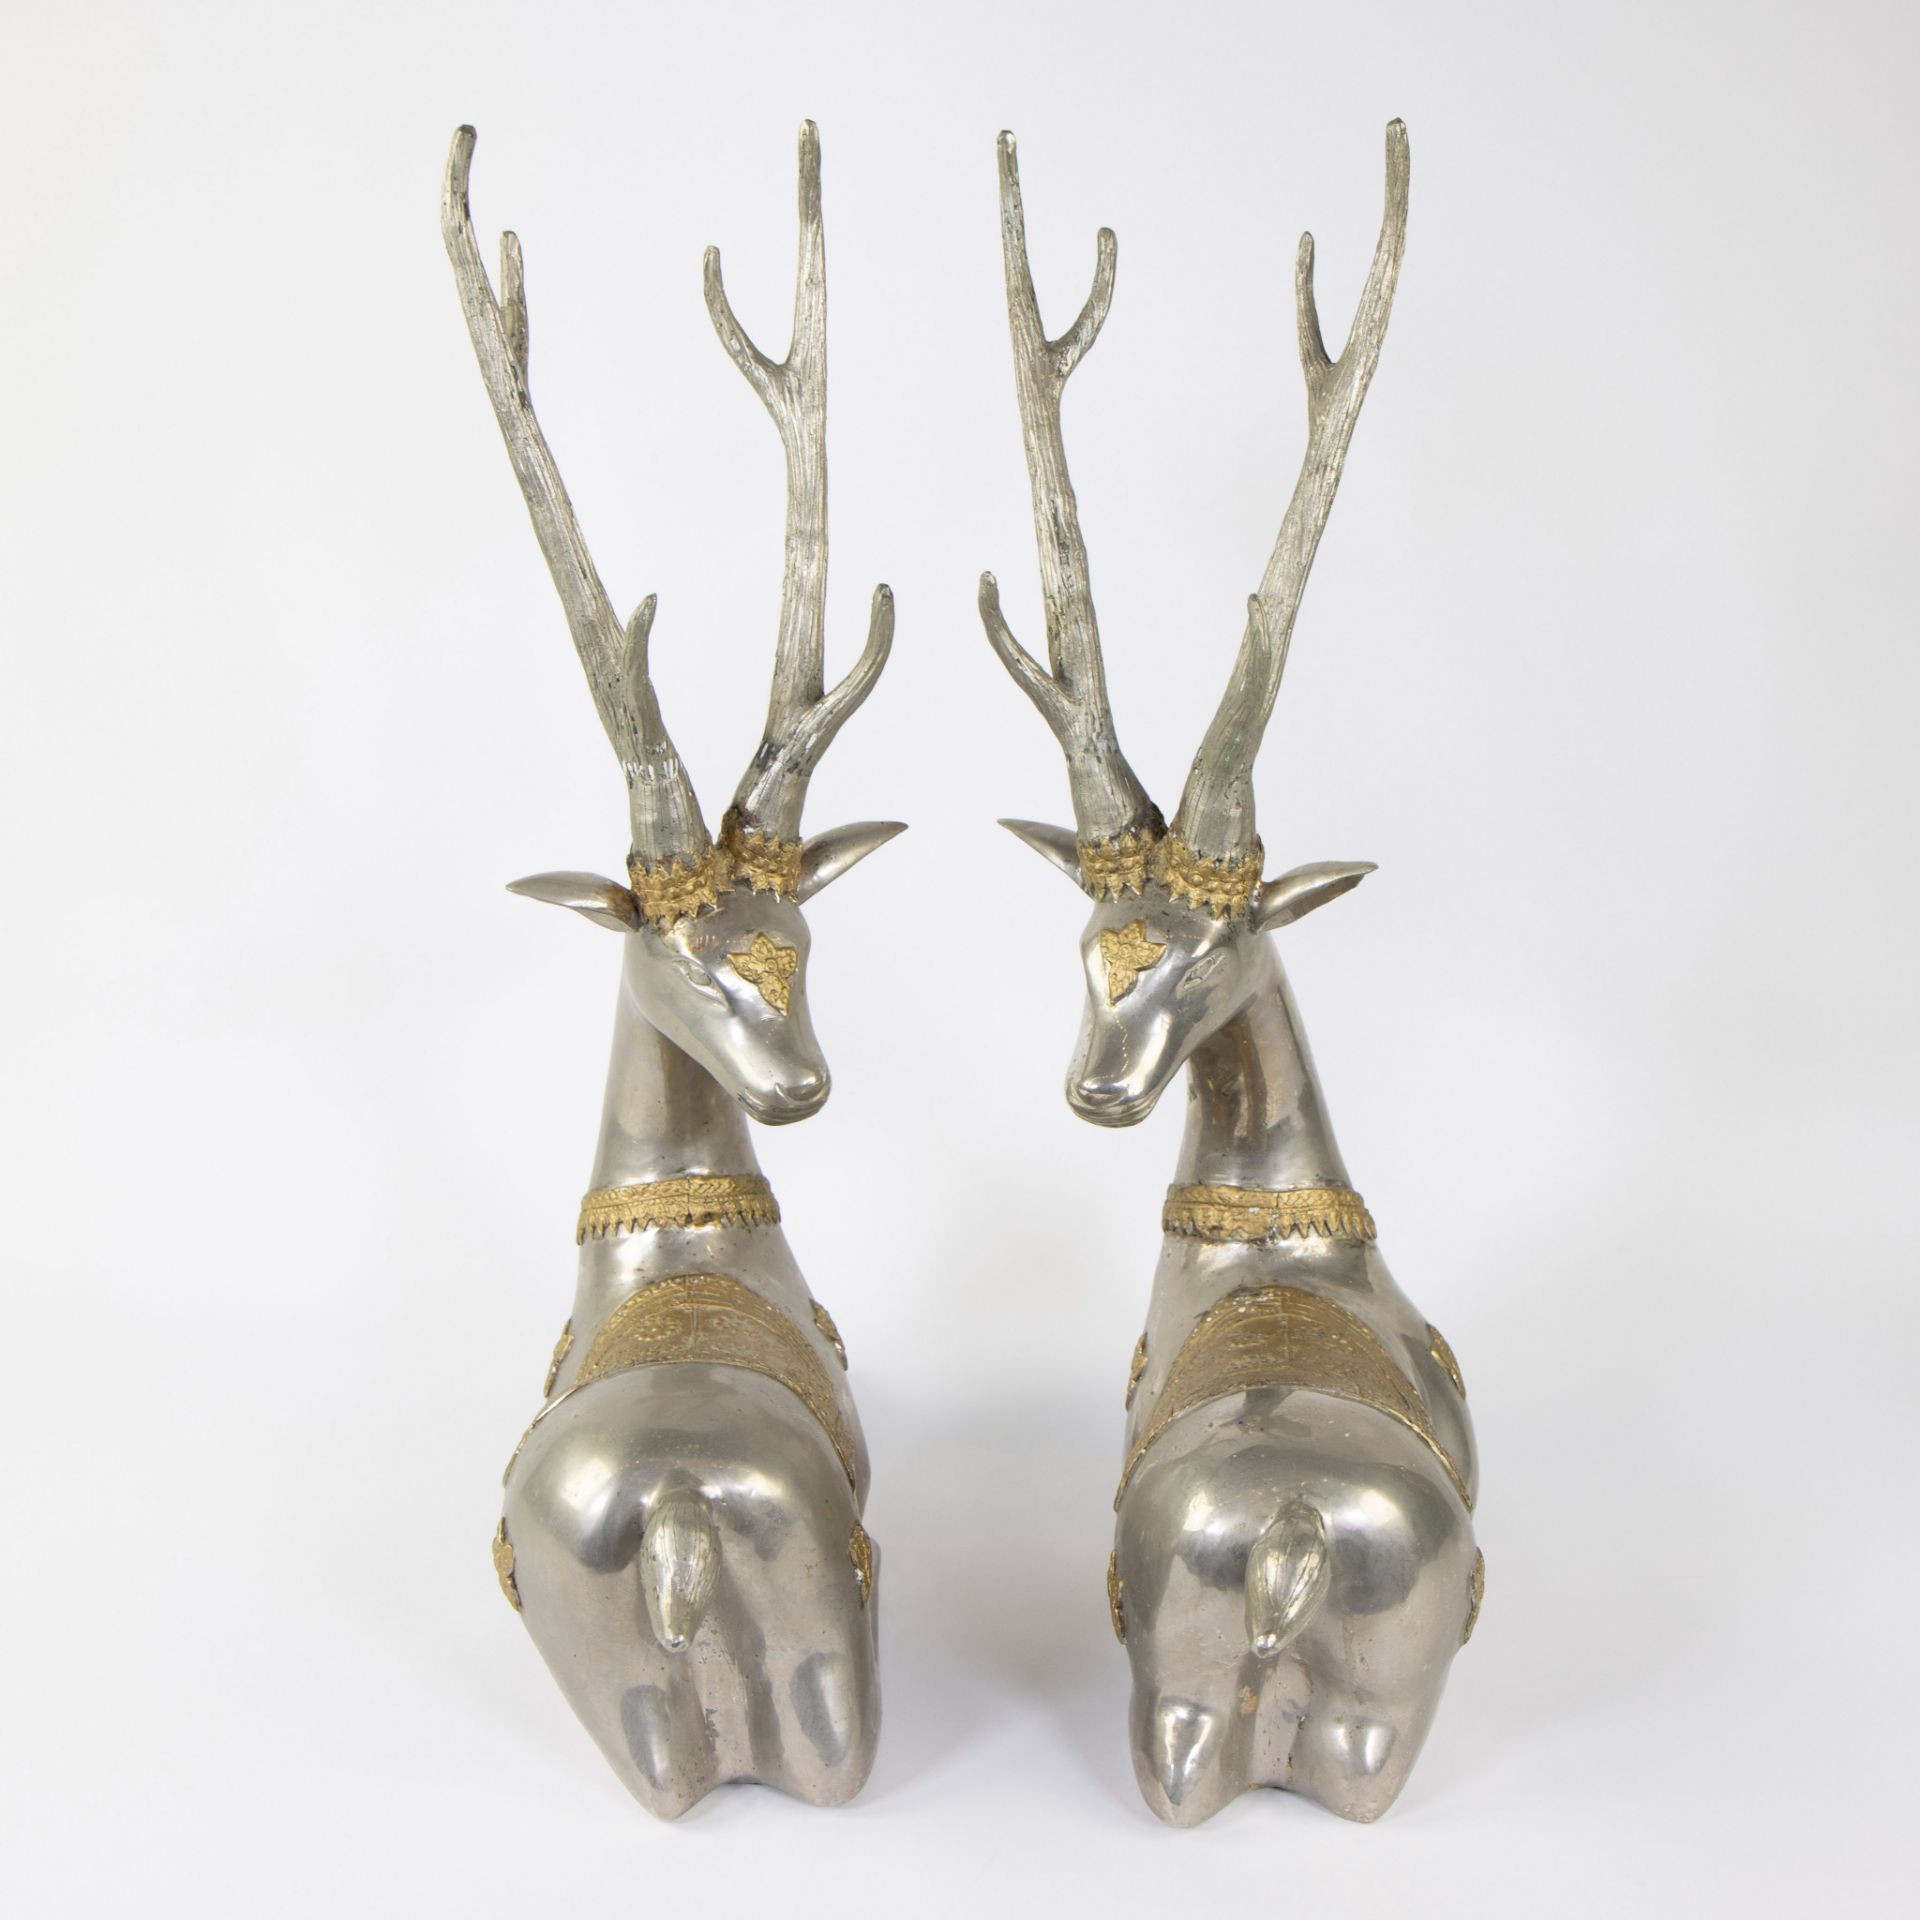 Pair of silver-plated and gilded deer in brass - Image 4 of 5